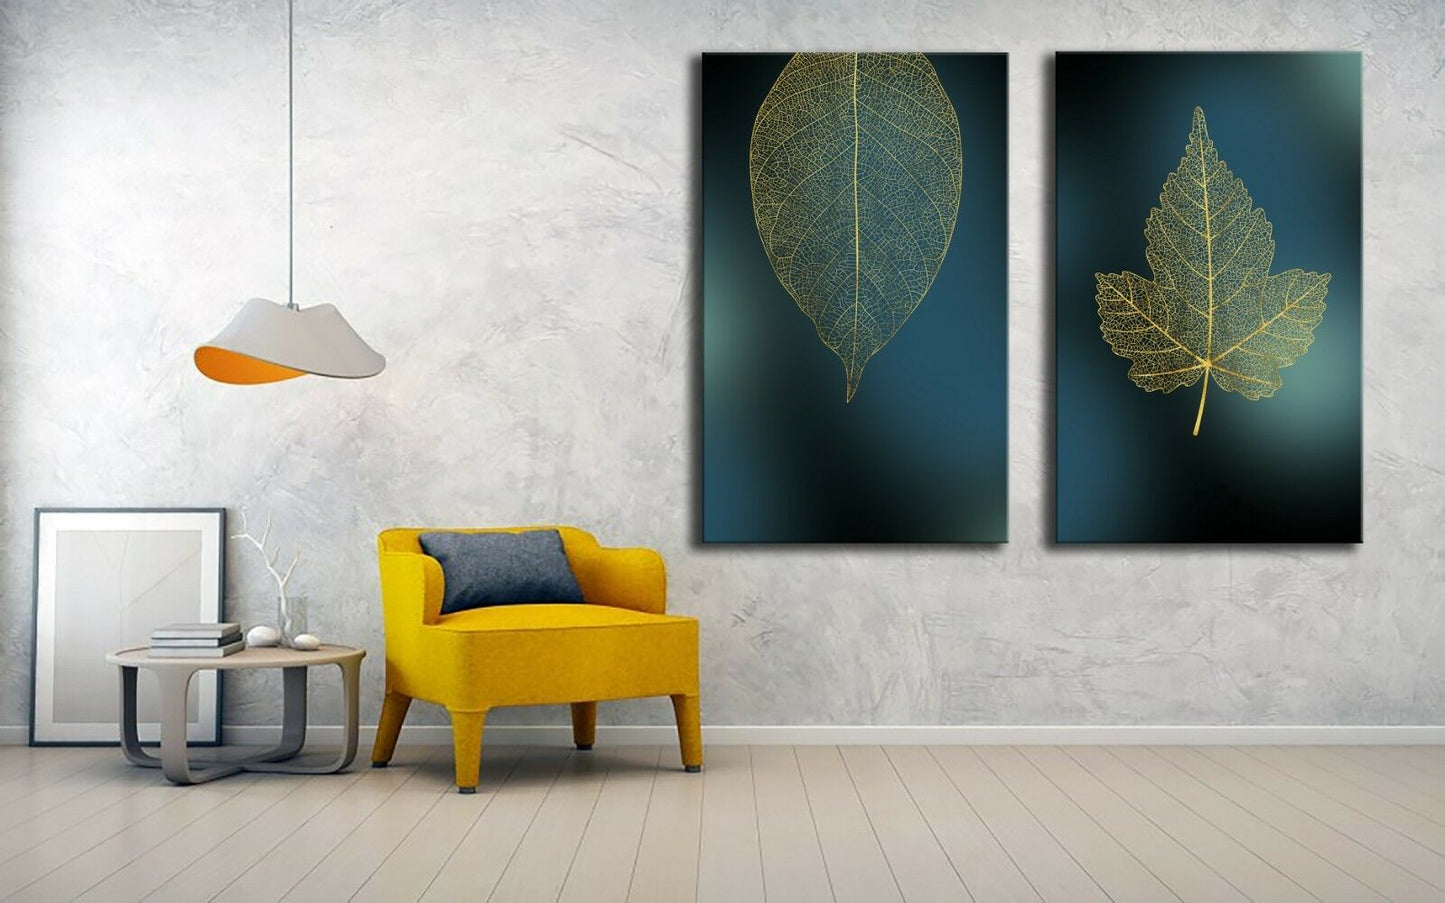 Gold Leaf veins on Green Framed Canvas Print Abstract Dinning Room Wall Art